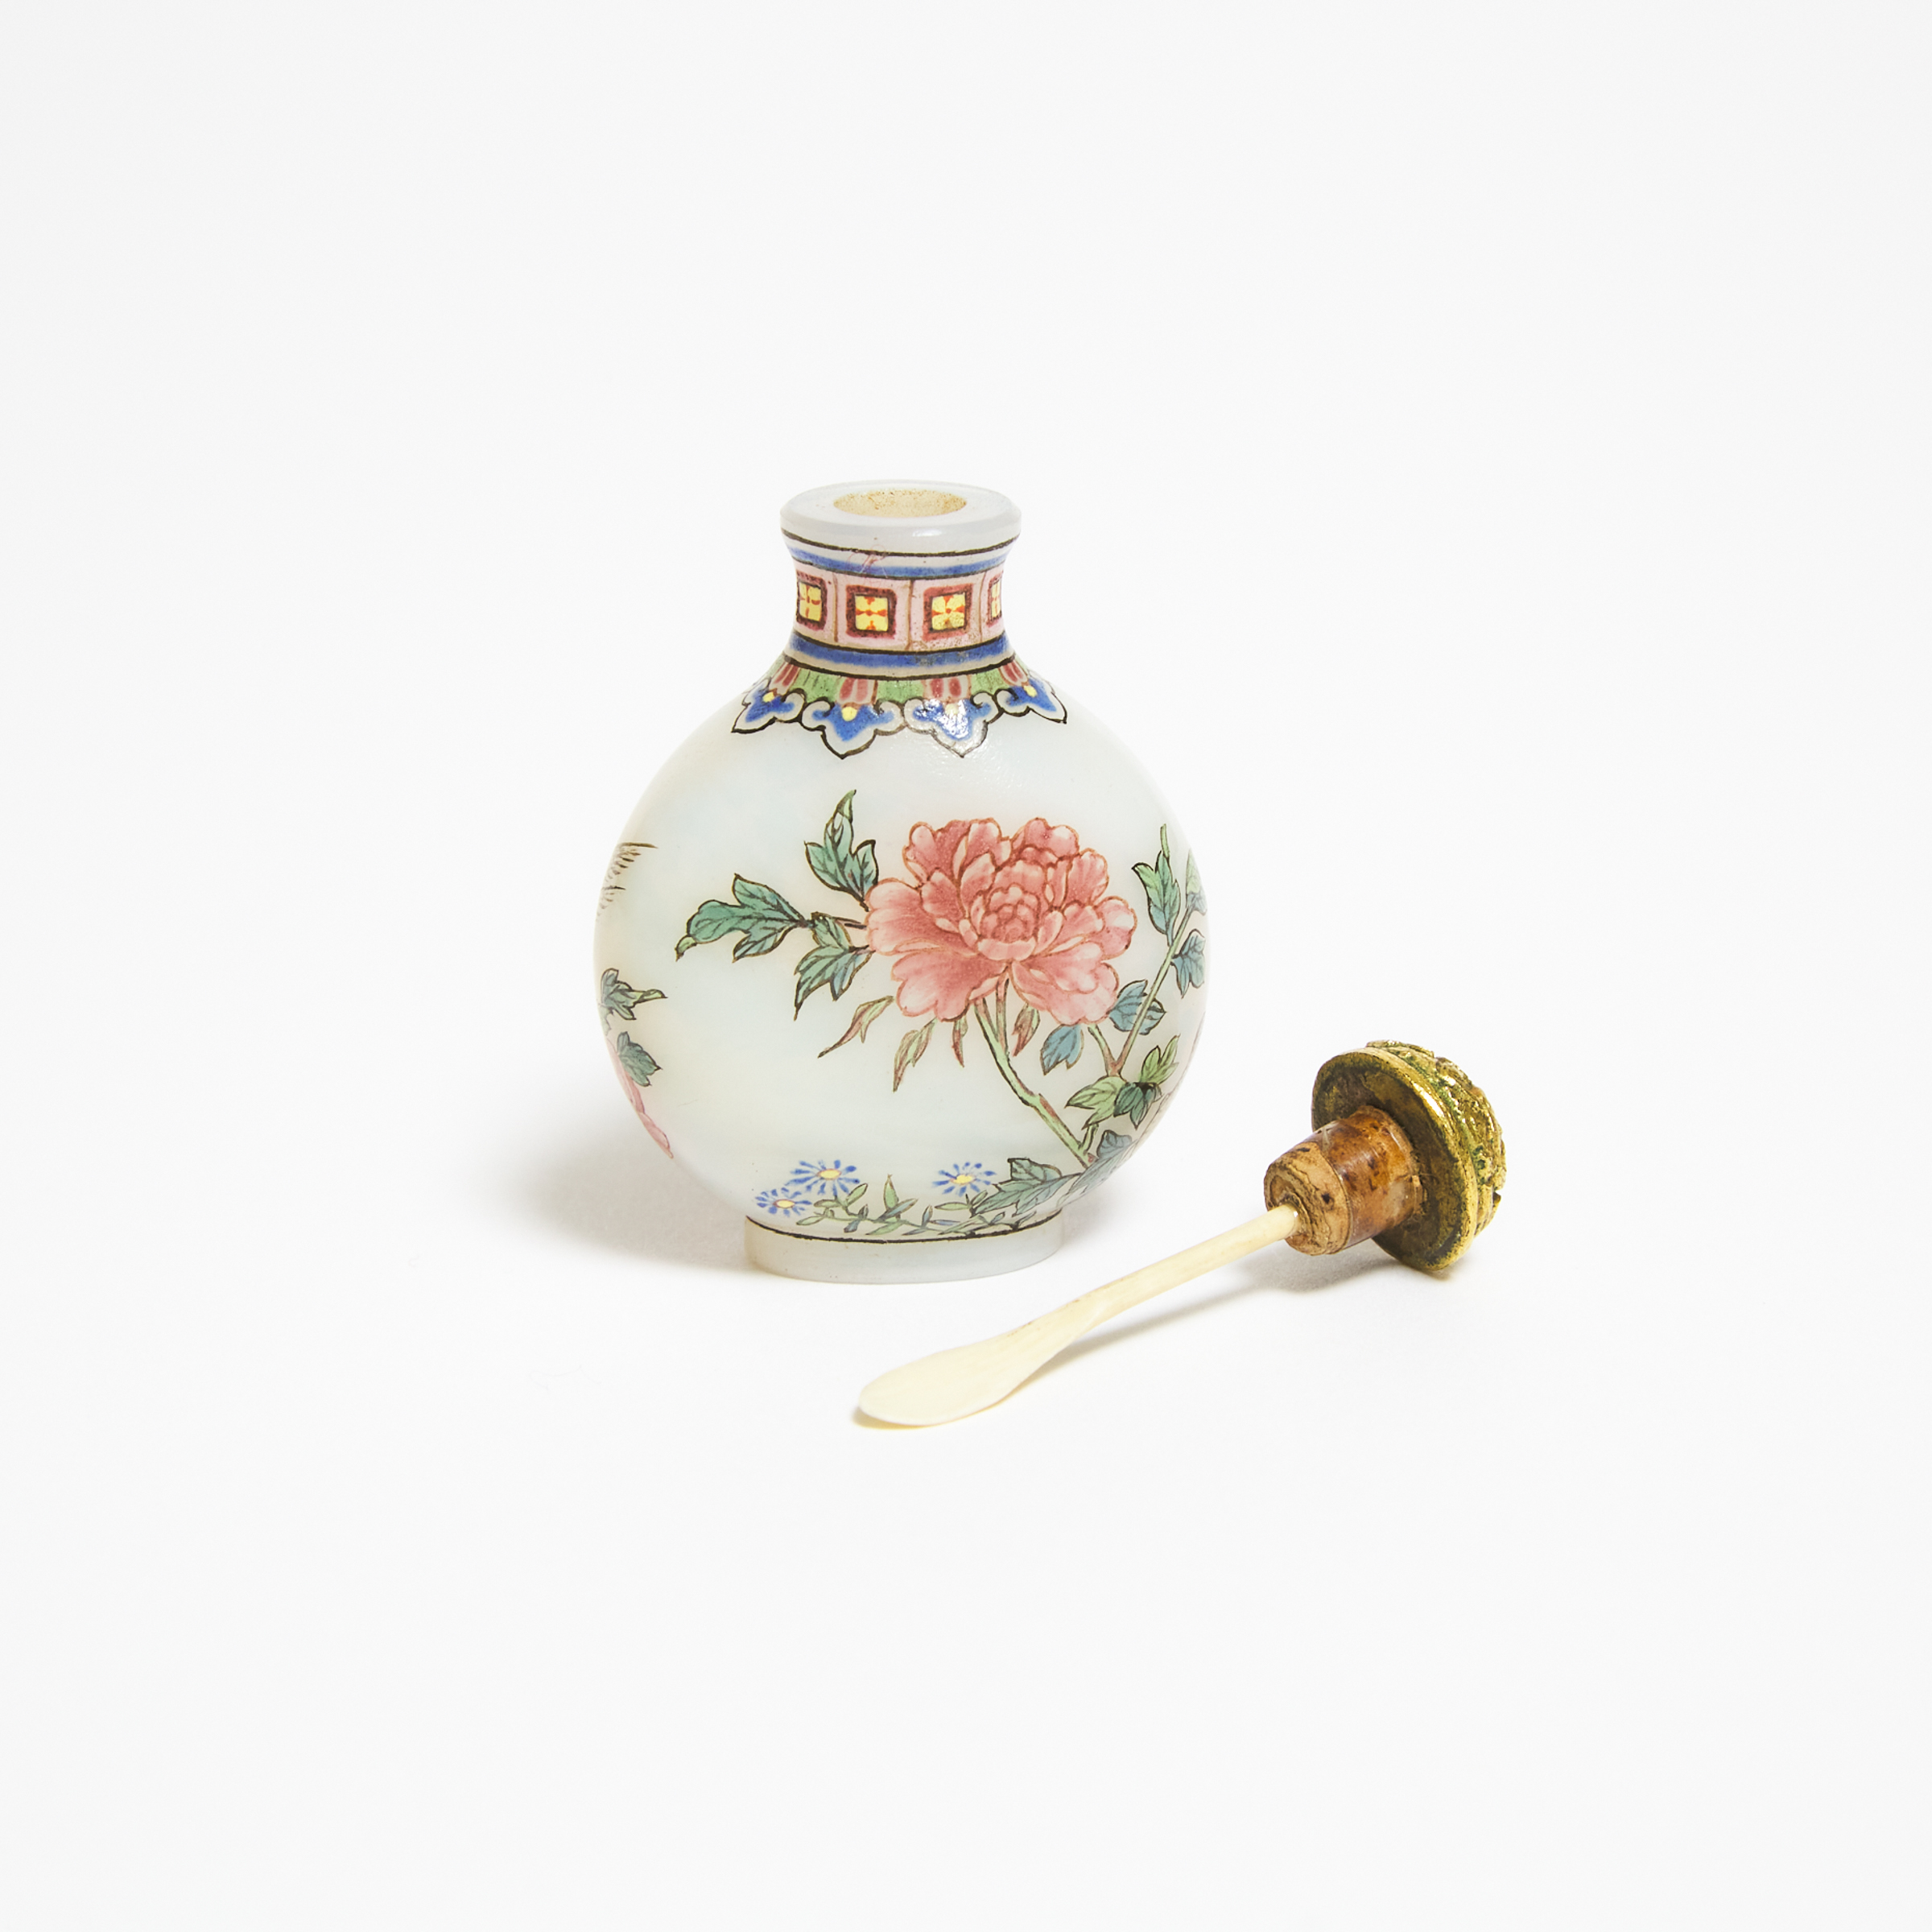 An Imperial-Style Famille Rose Enameled Glass Snuff Bottle, Mid 20th Century